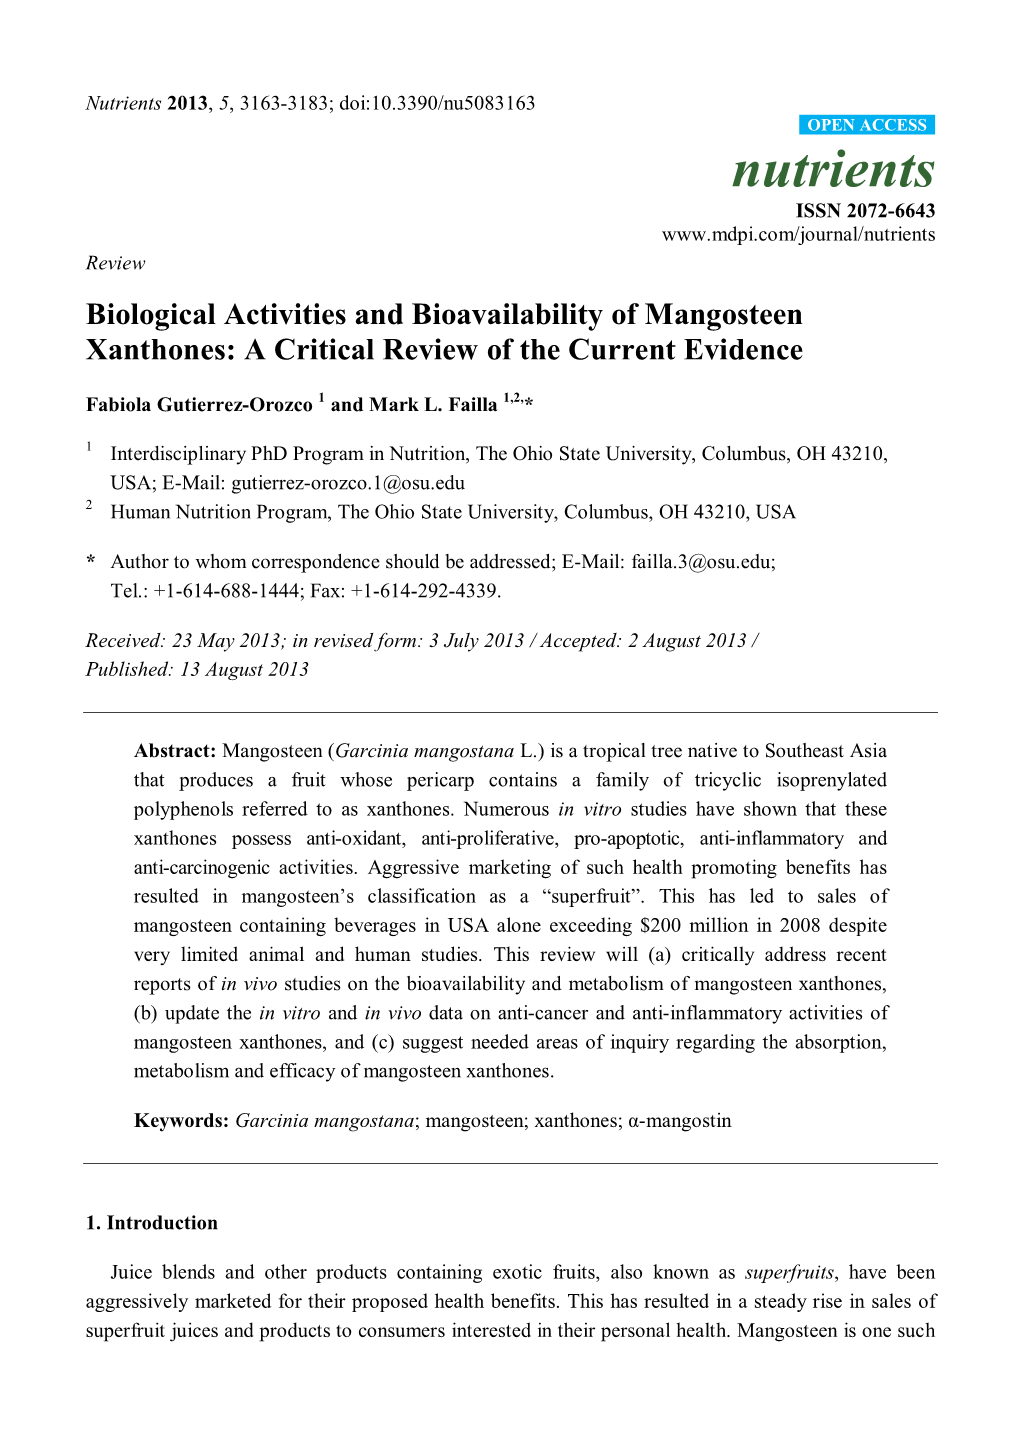 Biological Activities and Bioavailability of Mangosteen Xanthones: a Critical Review of the Current Evidence